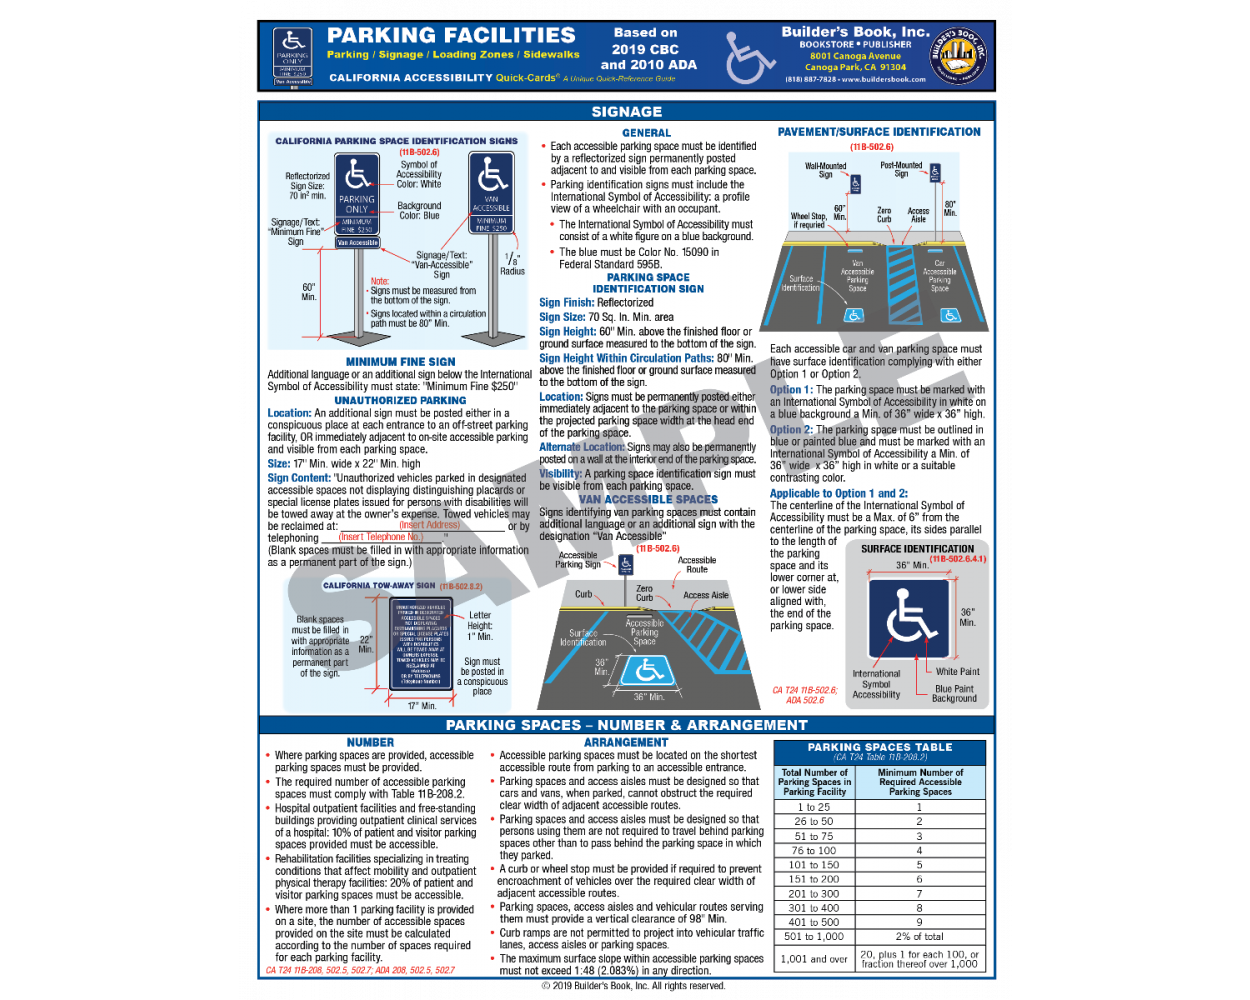 CA Accessibility for Parking Facilities Based on 2019 CBC & 2010 ADA